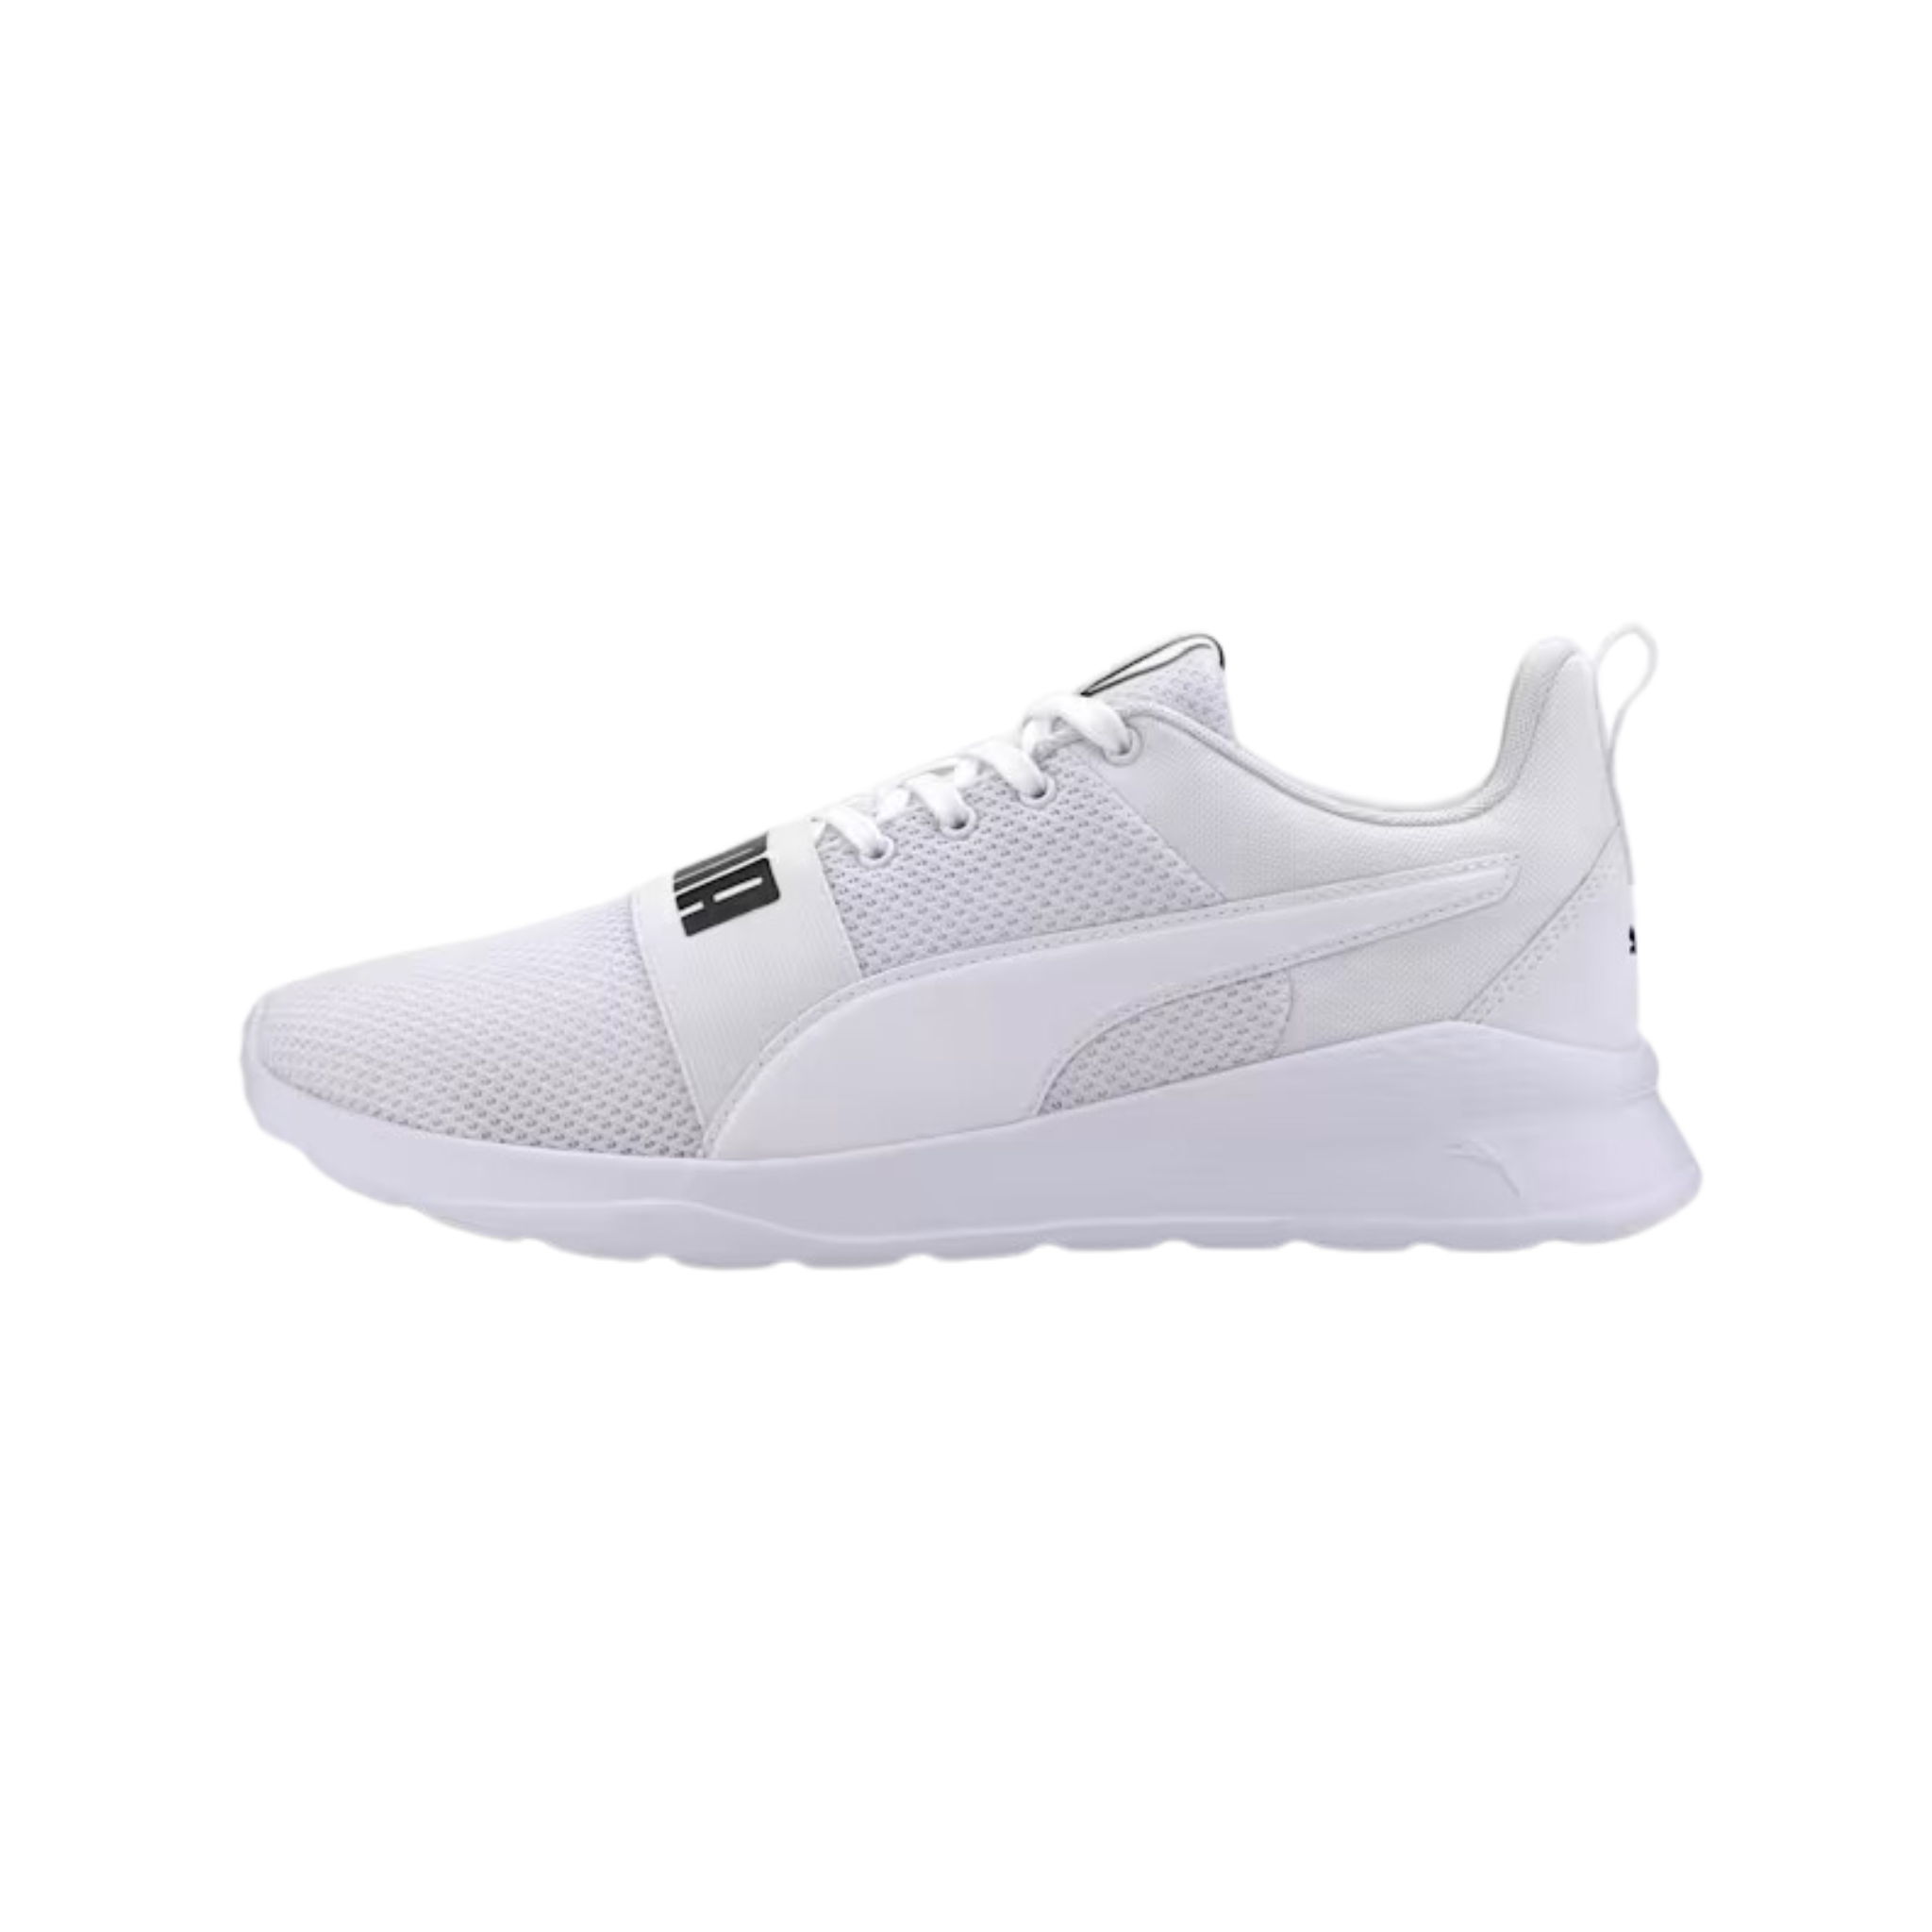 Puma Men's Shoes Sale (Standard & Wide): Extra 30% Off: Turin III Sneakers